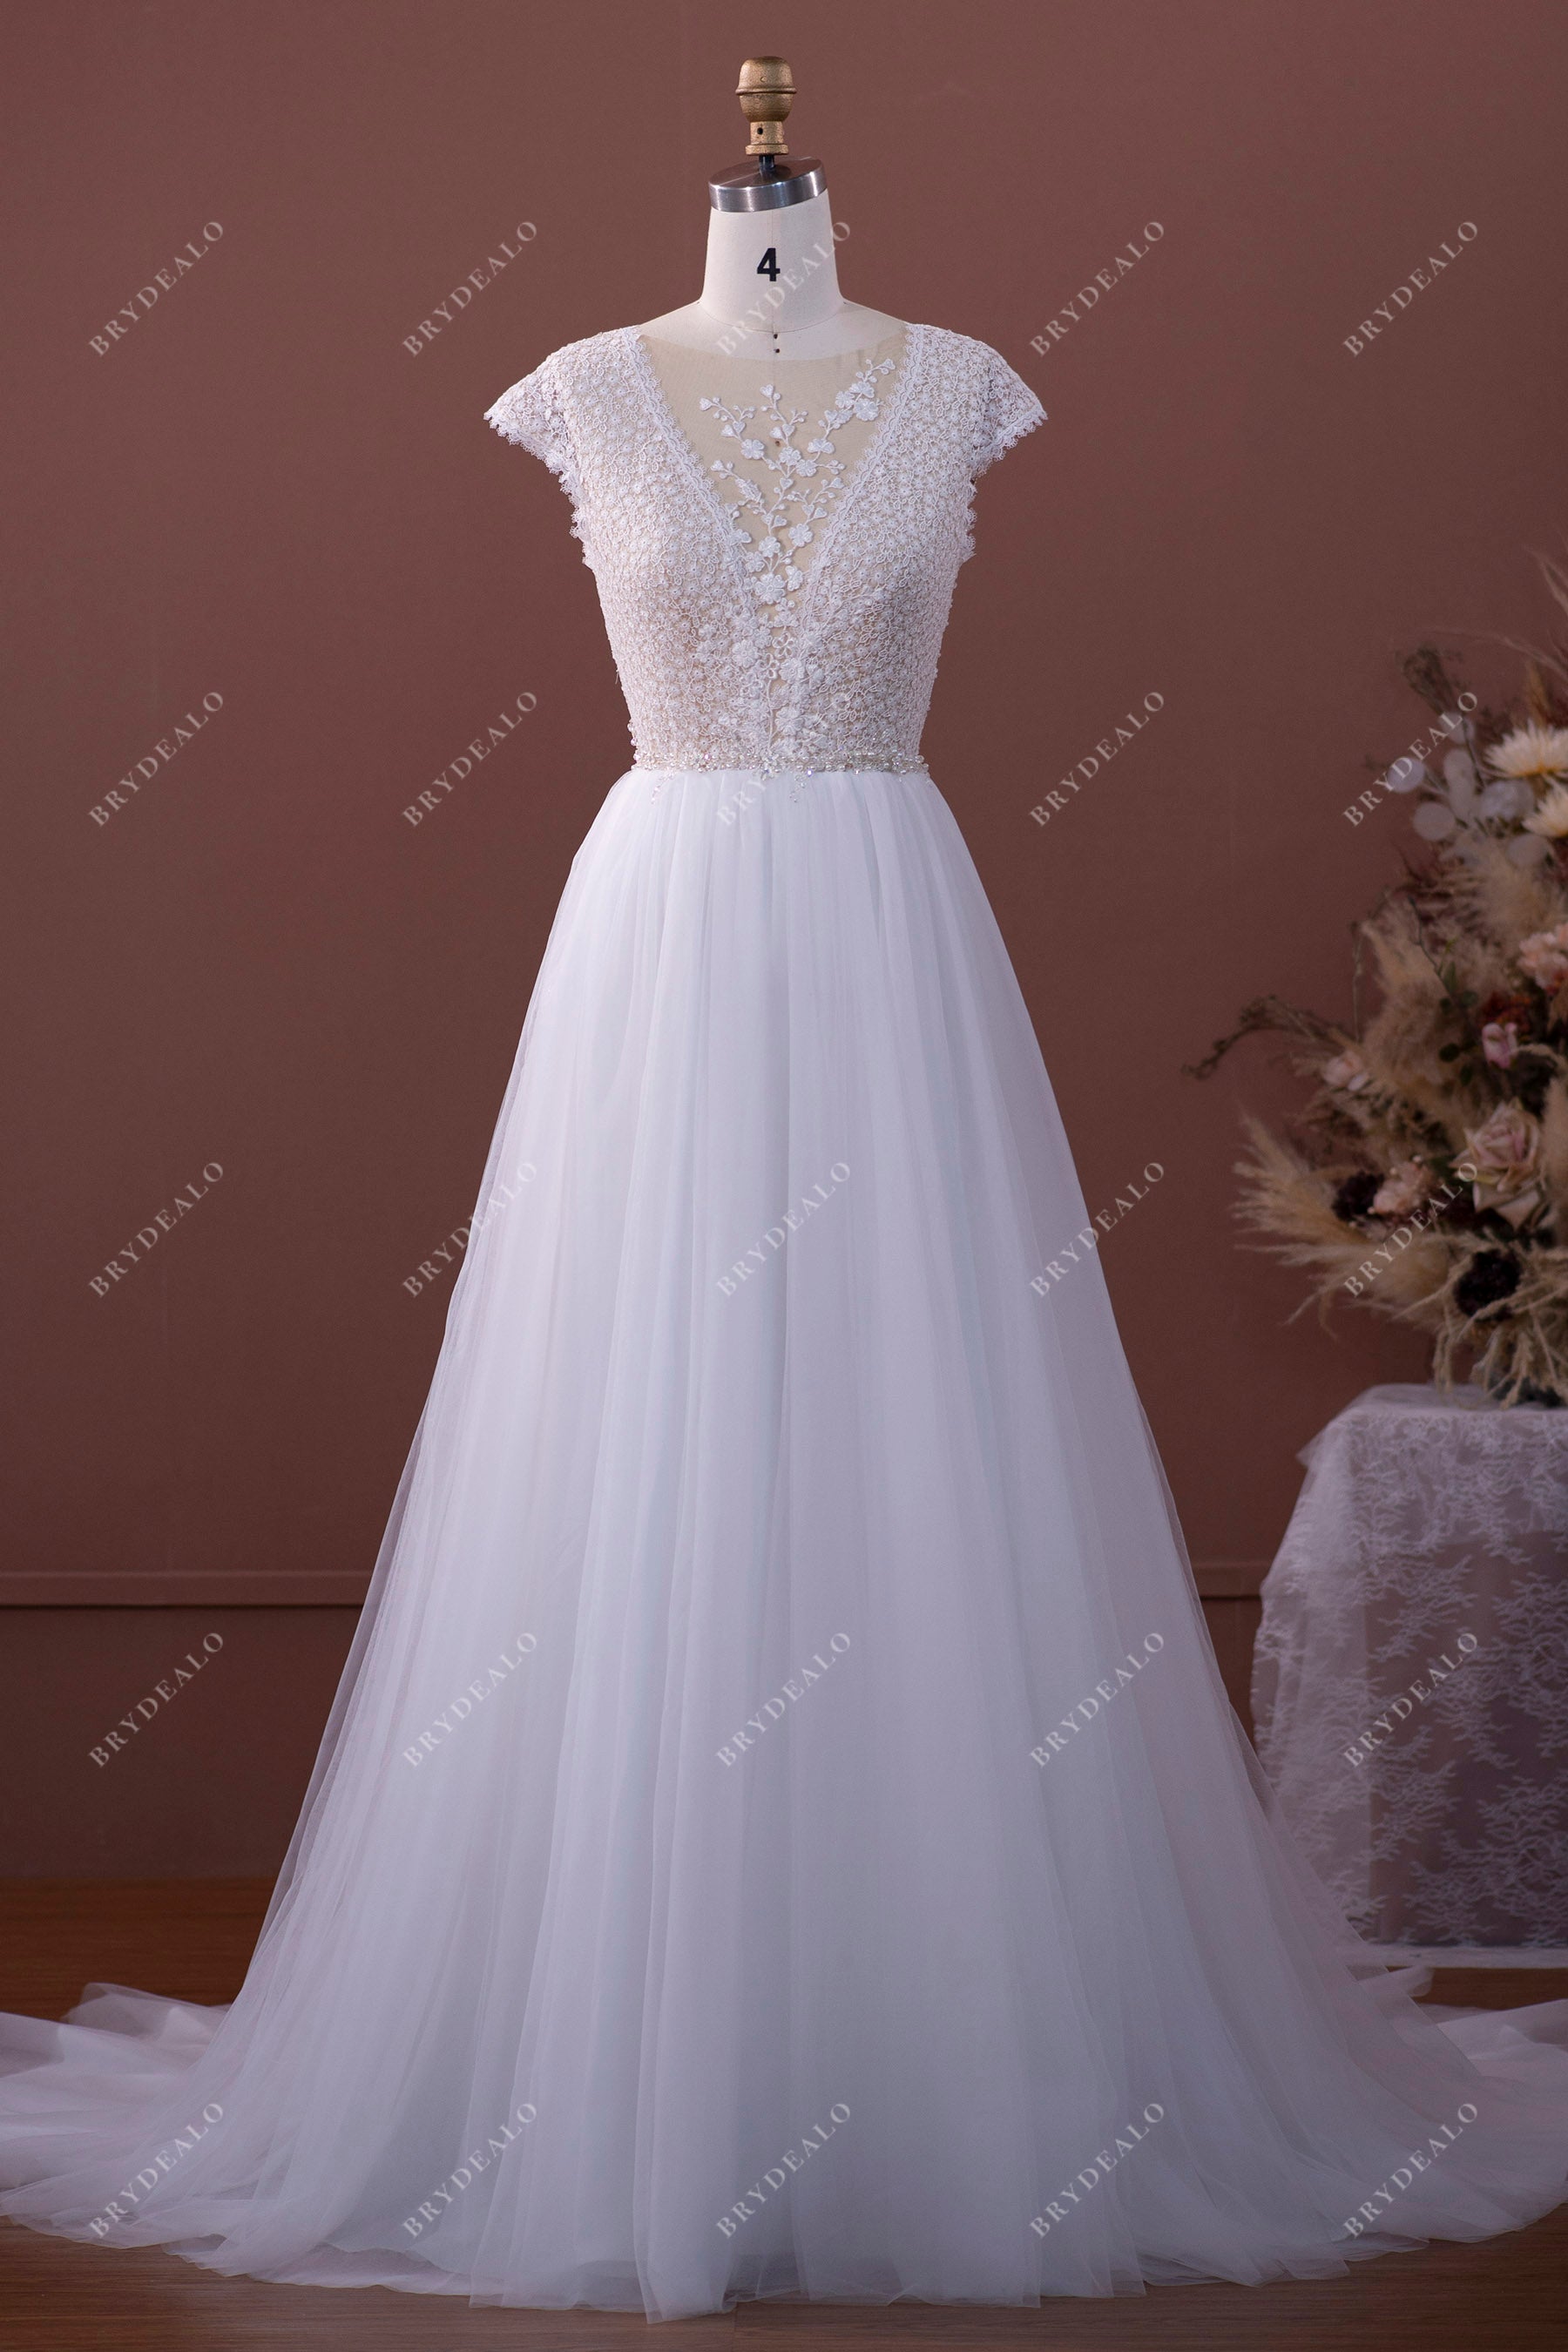 Cap Sleeve Boho Floral Lace Tulle Bridal Gown